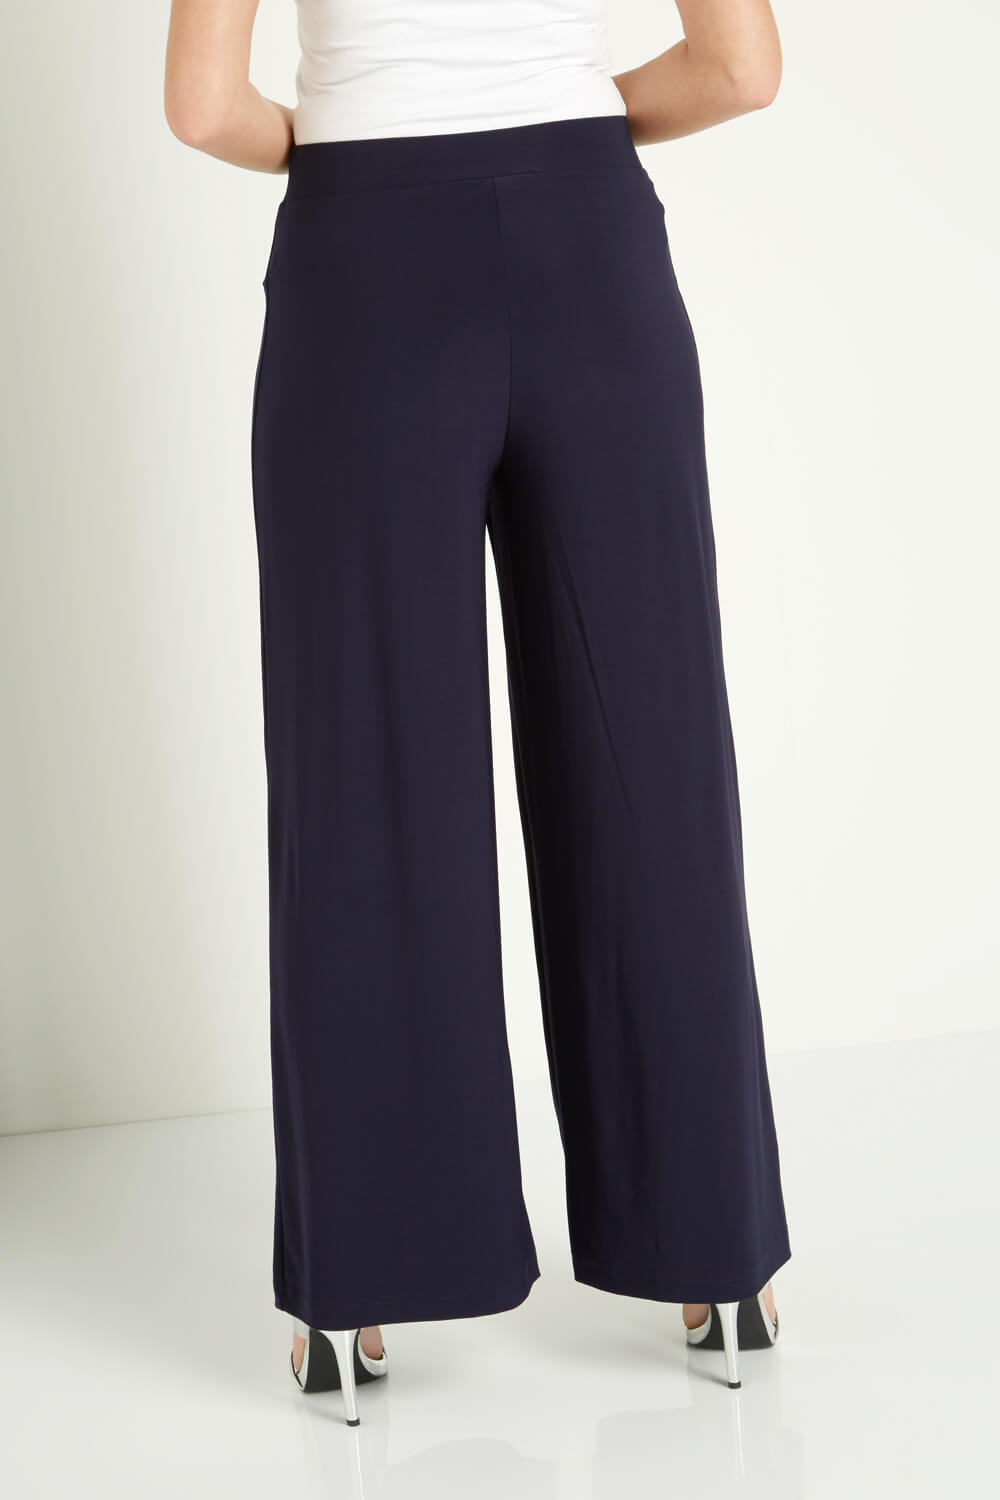 Navy  Wide Leg Trousers, Image 2 of 3